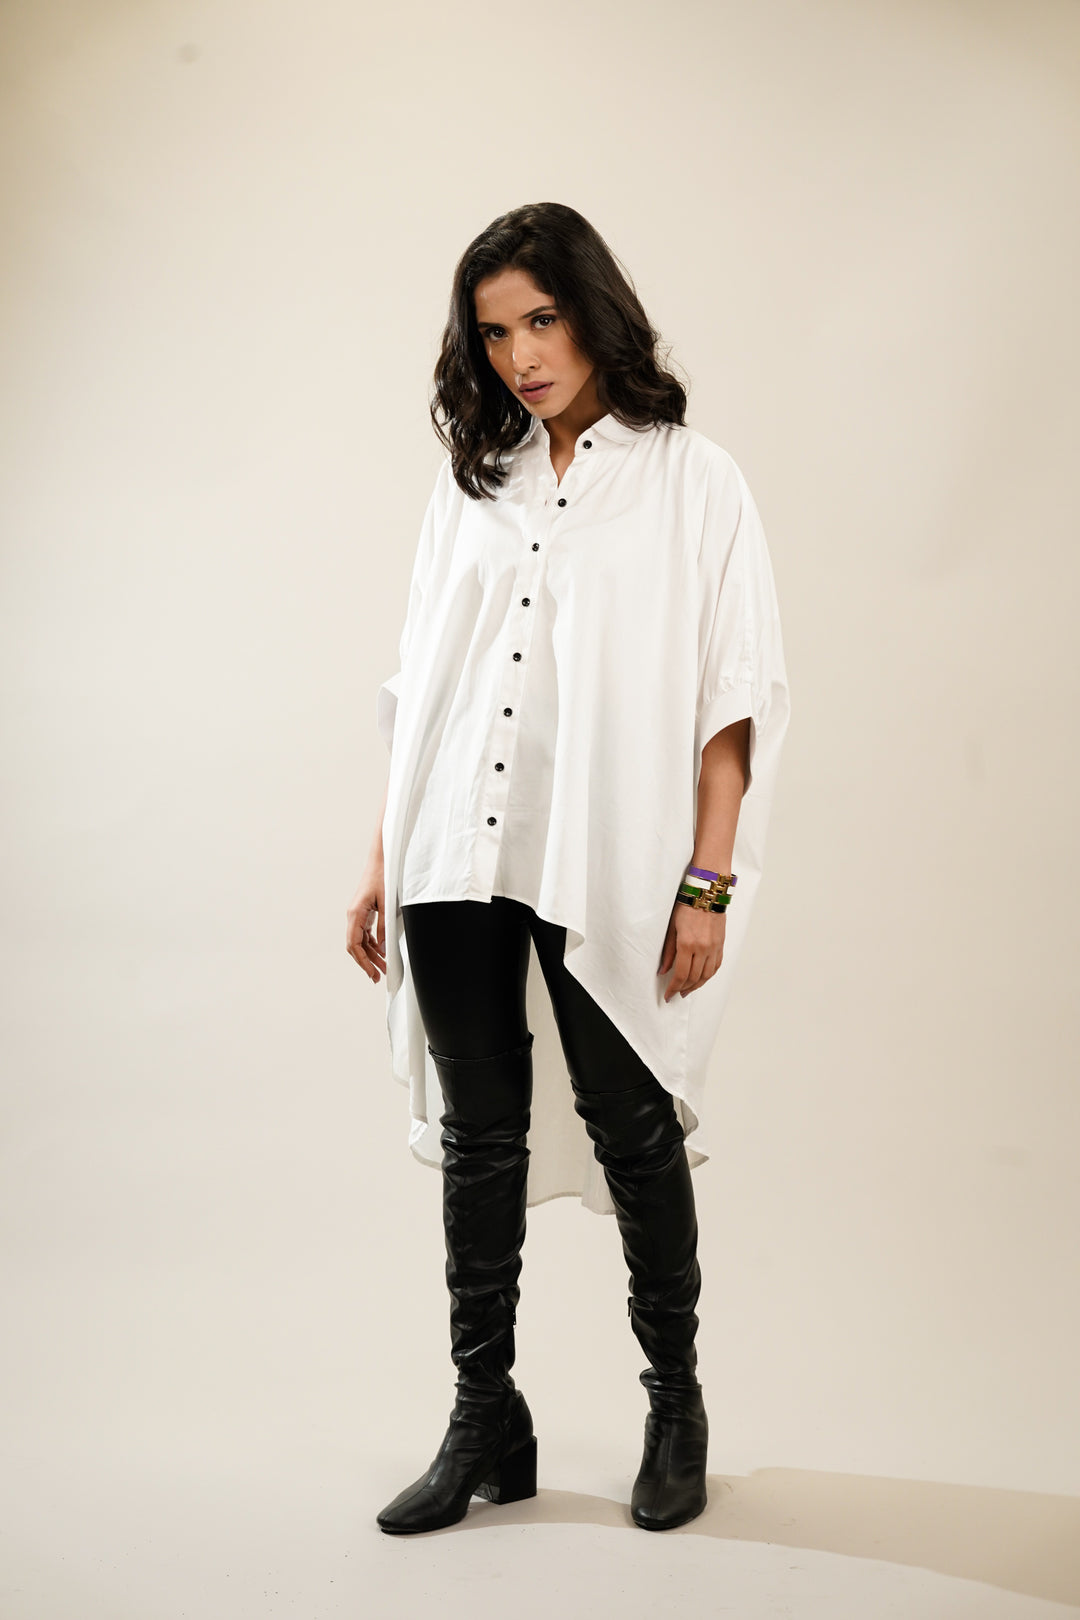 Relaxed fit white shirt with full sleeves